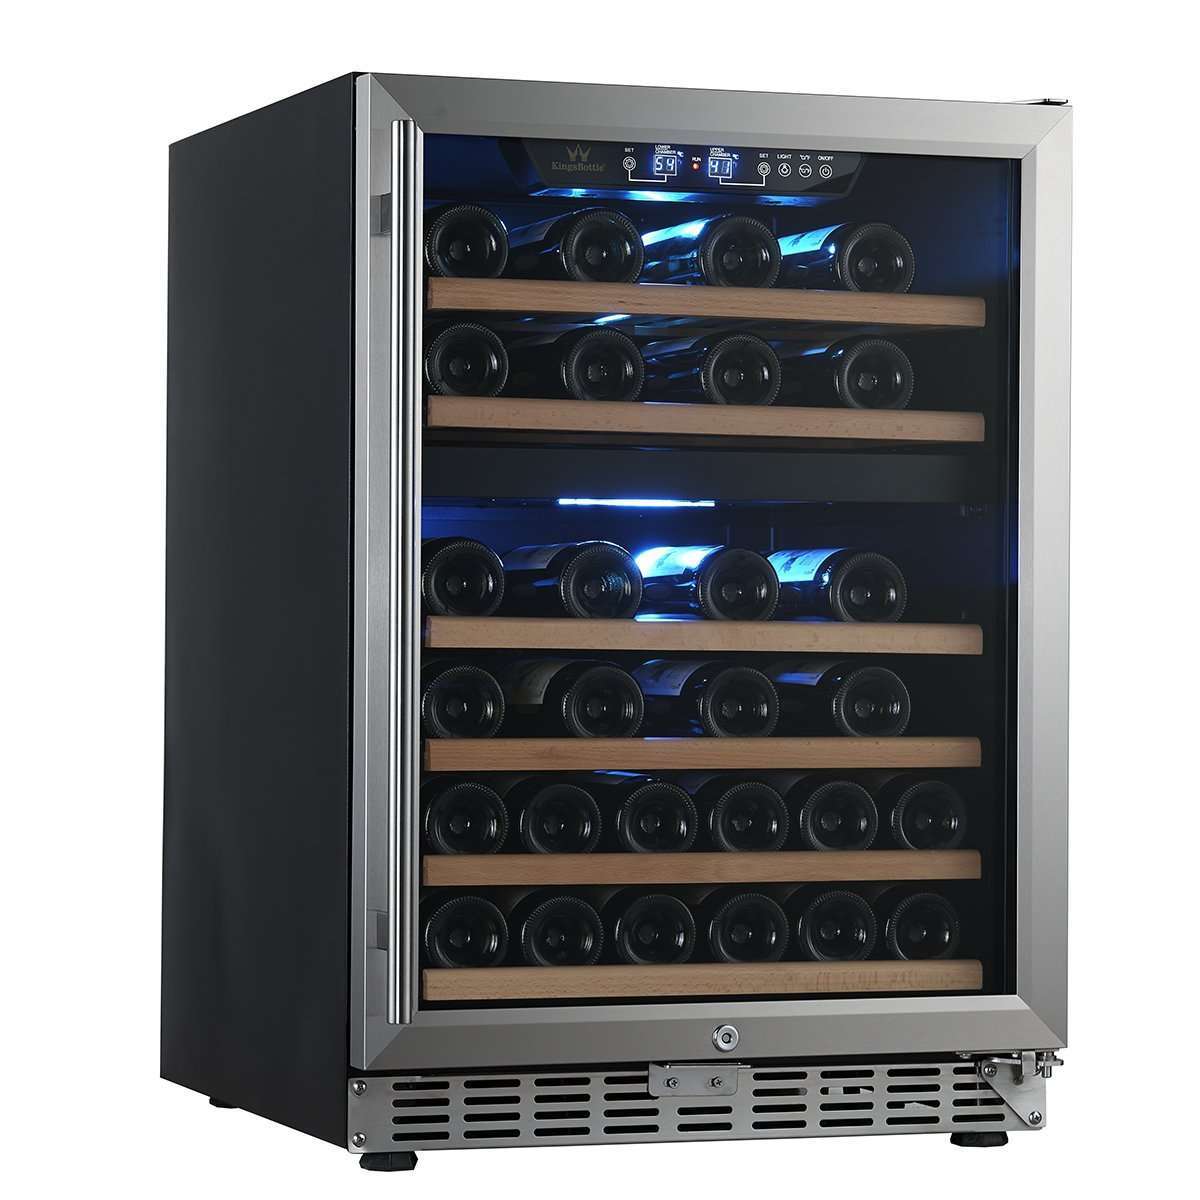 Kingsbottle 24" Dual Zone Built-in Wine Cooler | Triple Glassdoor With Two Low-E KBUSF54D-SS-Wine Coolers-The Wine Cooler Club